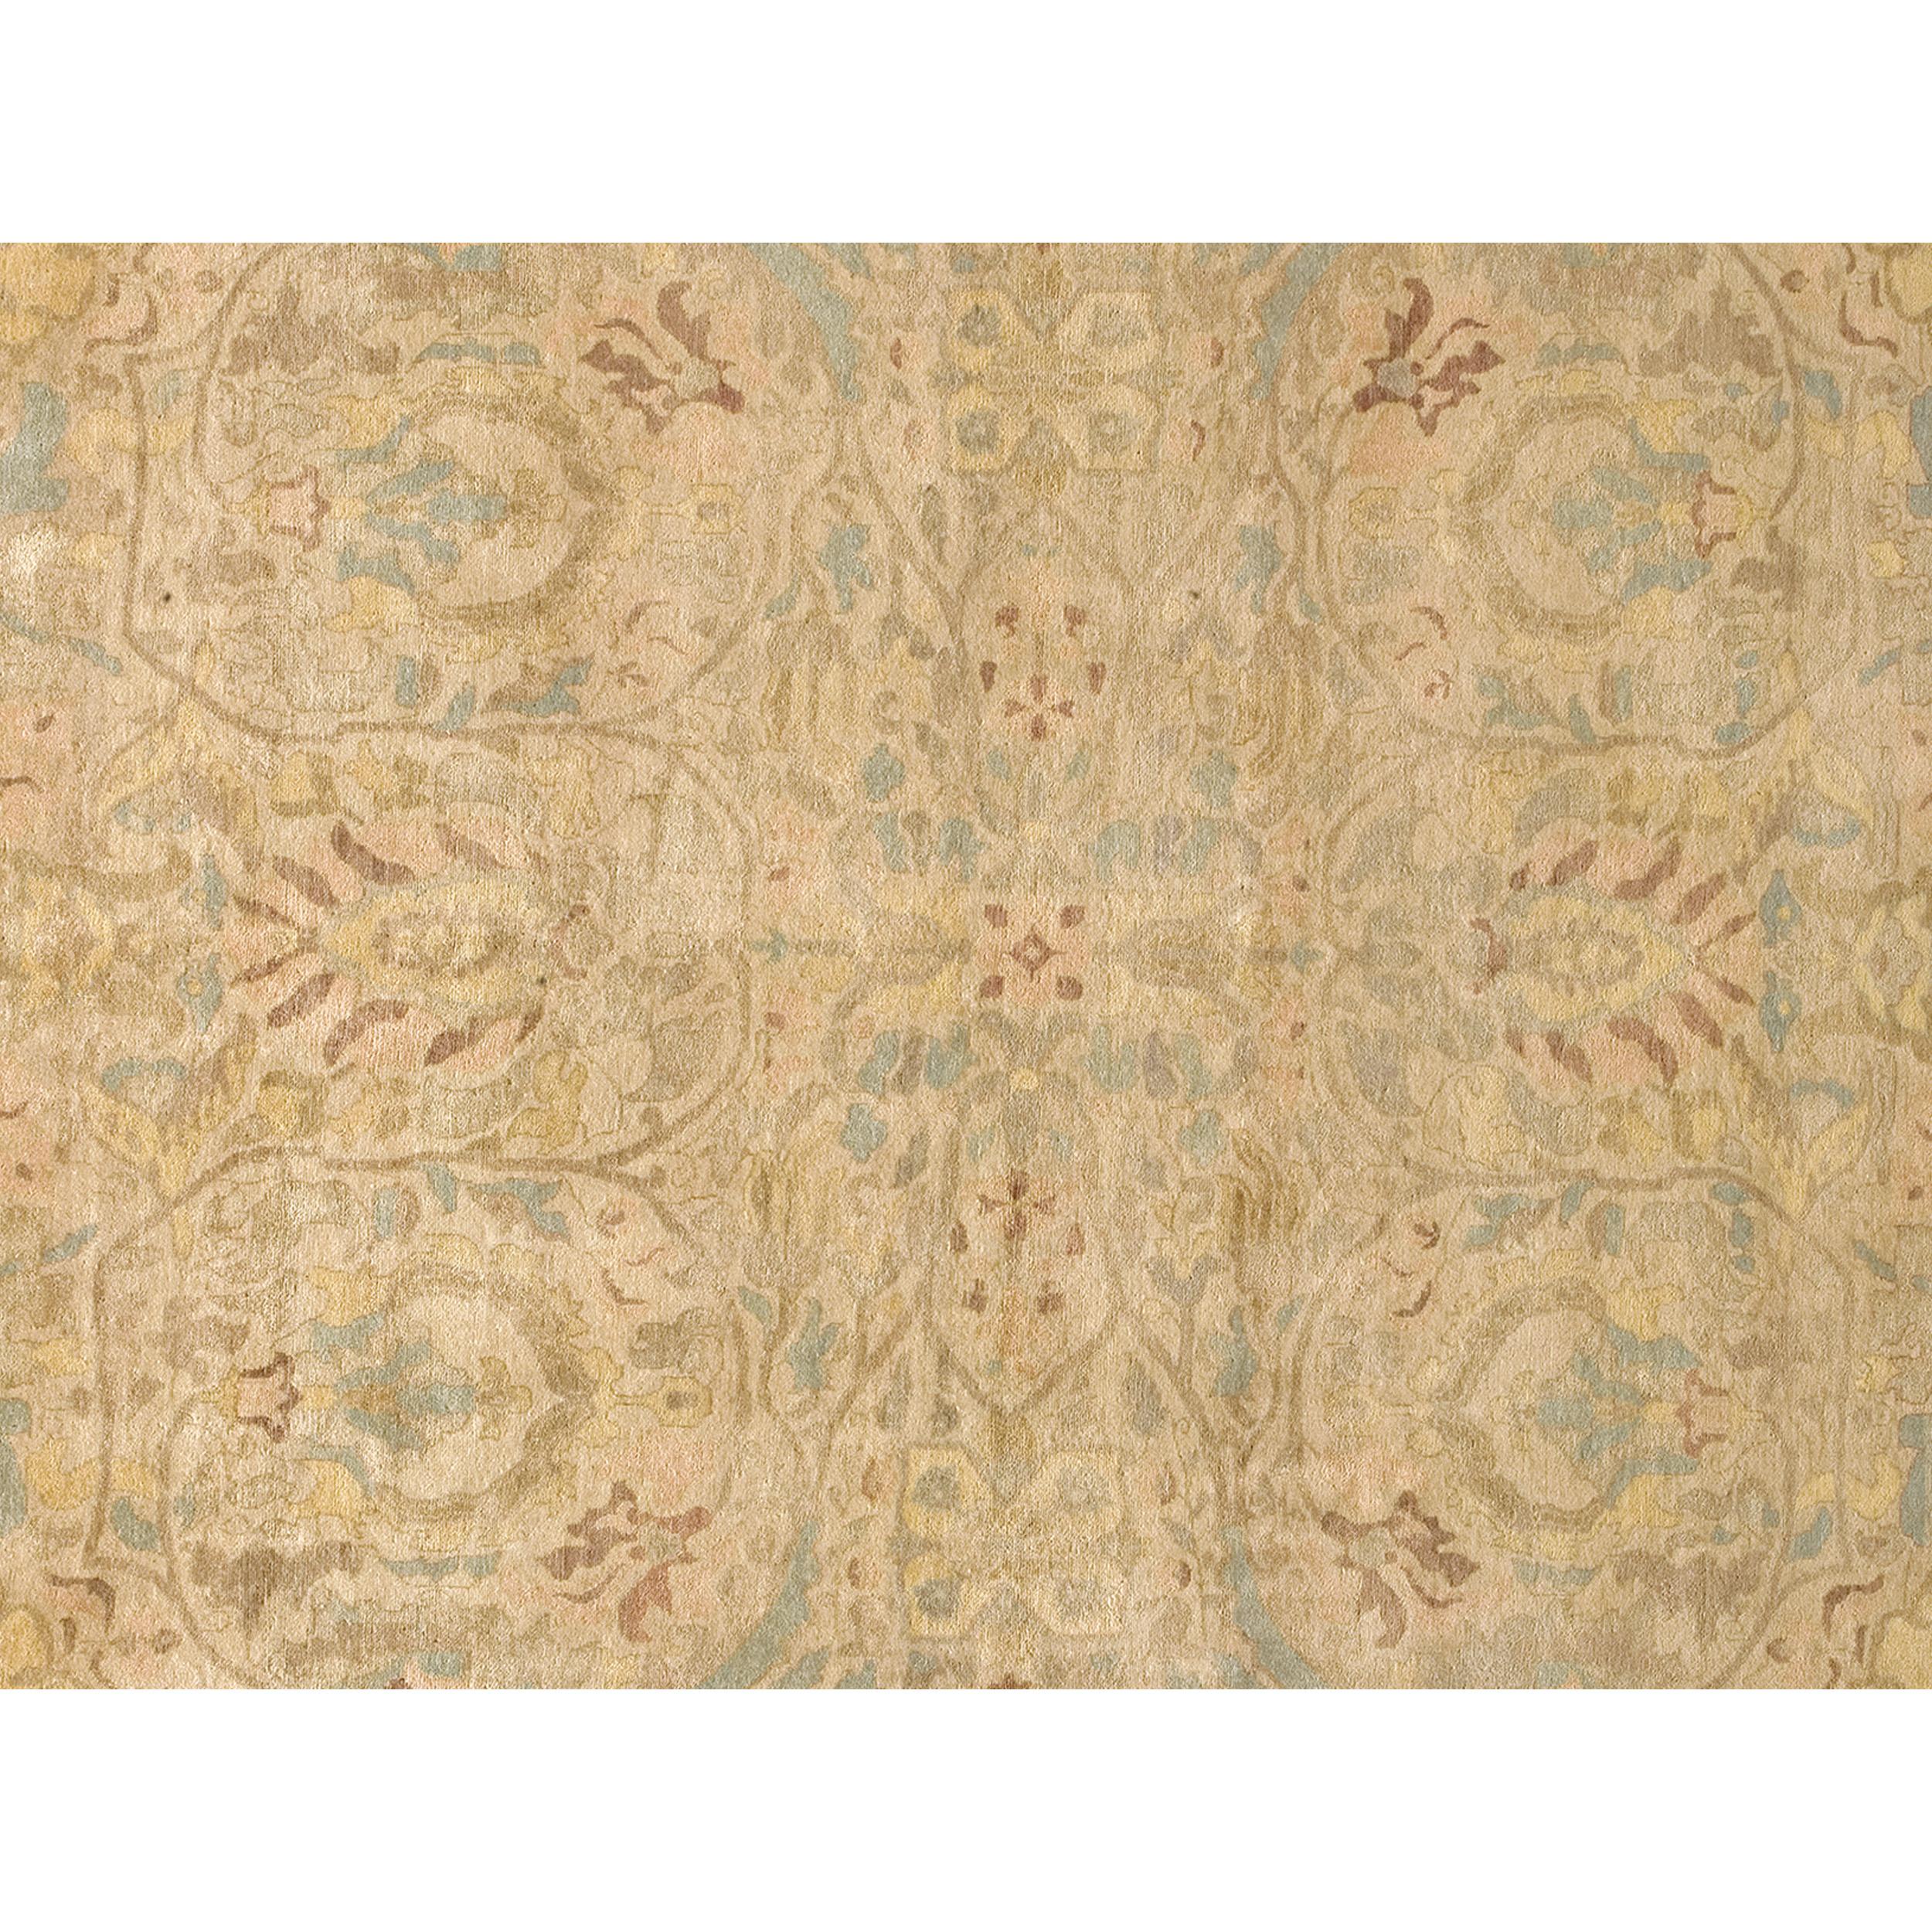 12x15 hand-knotted wool rug